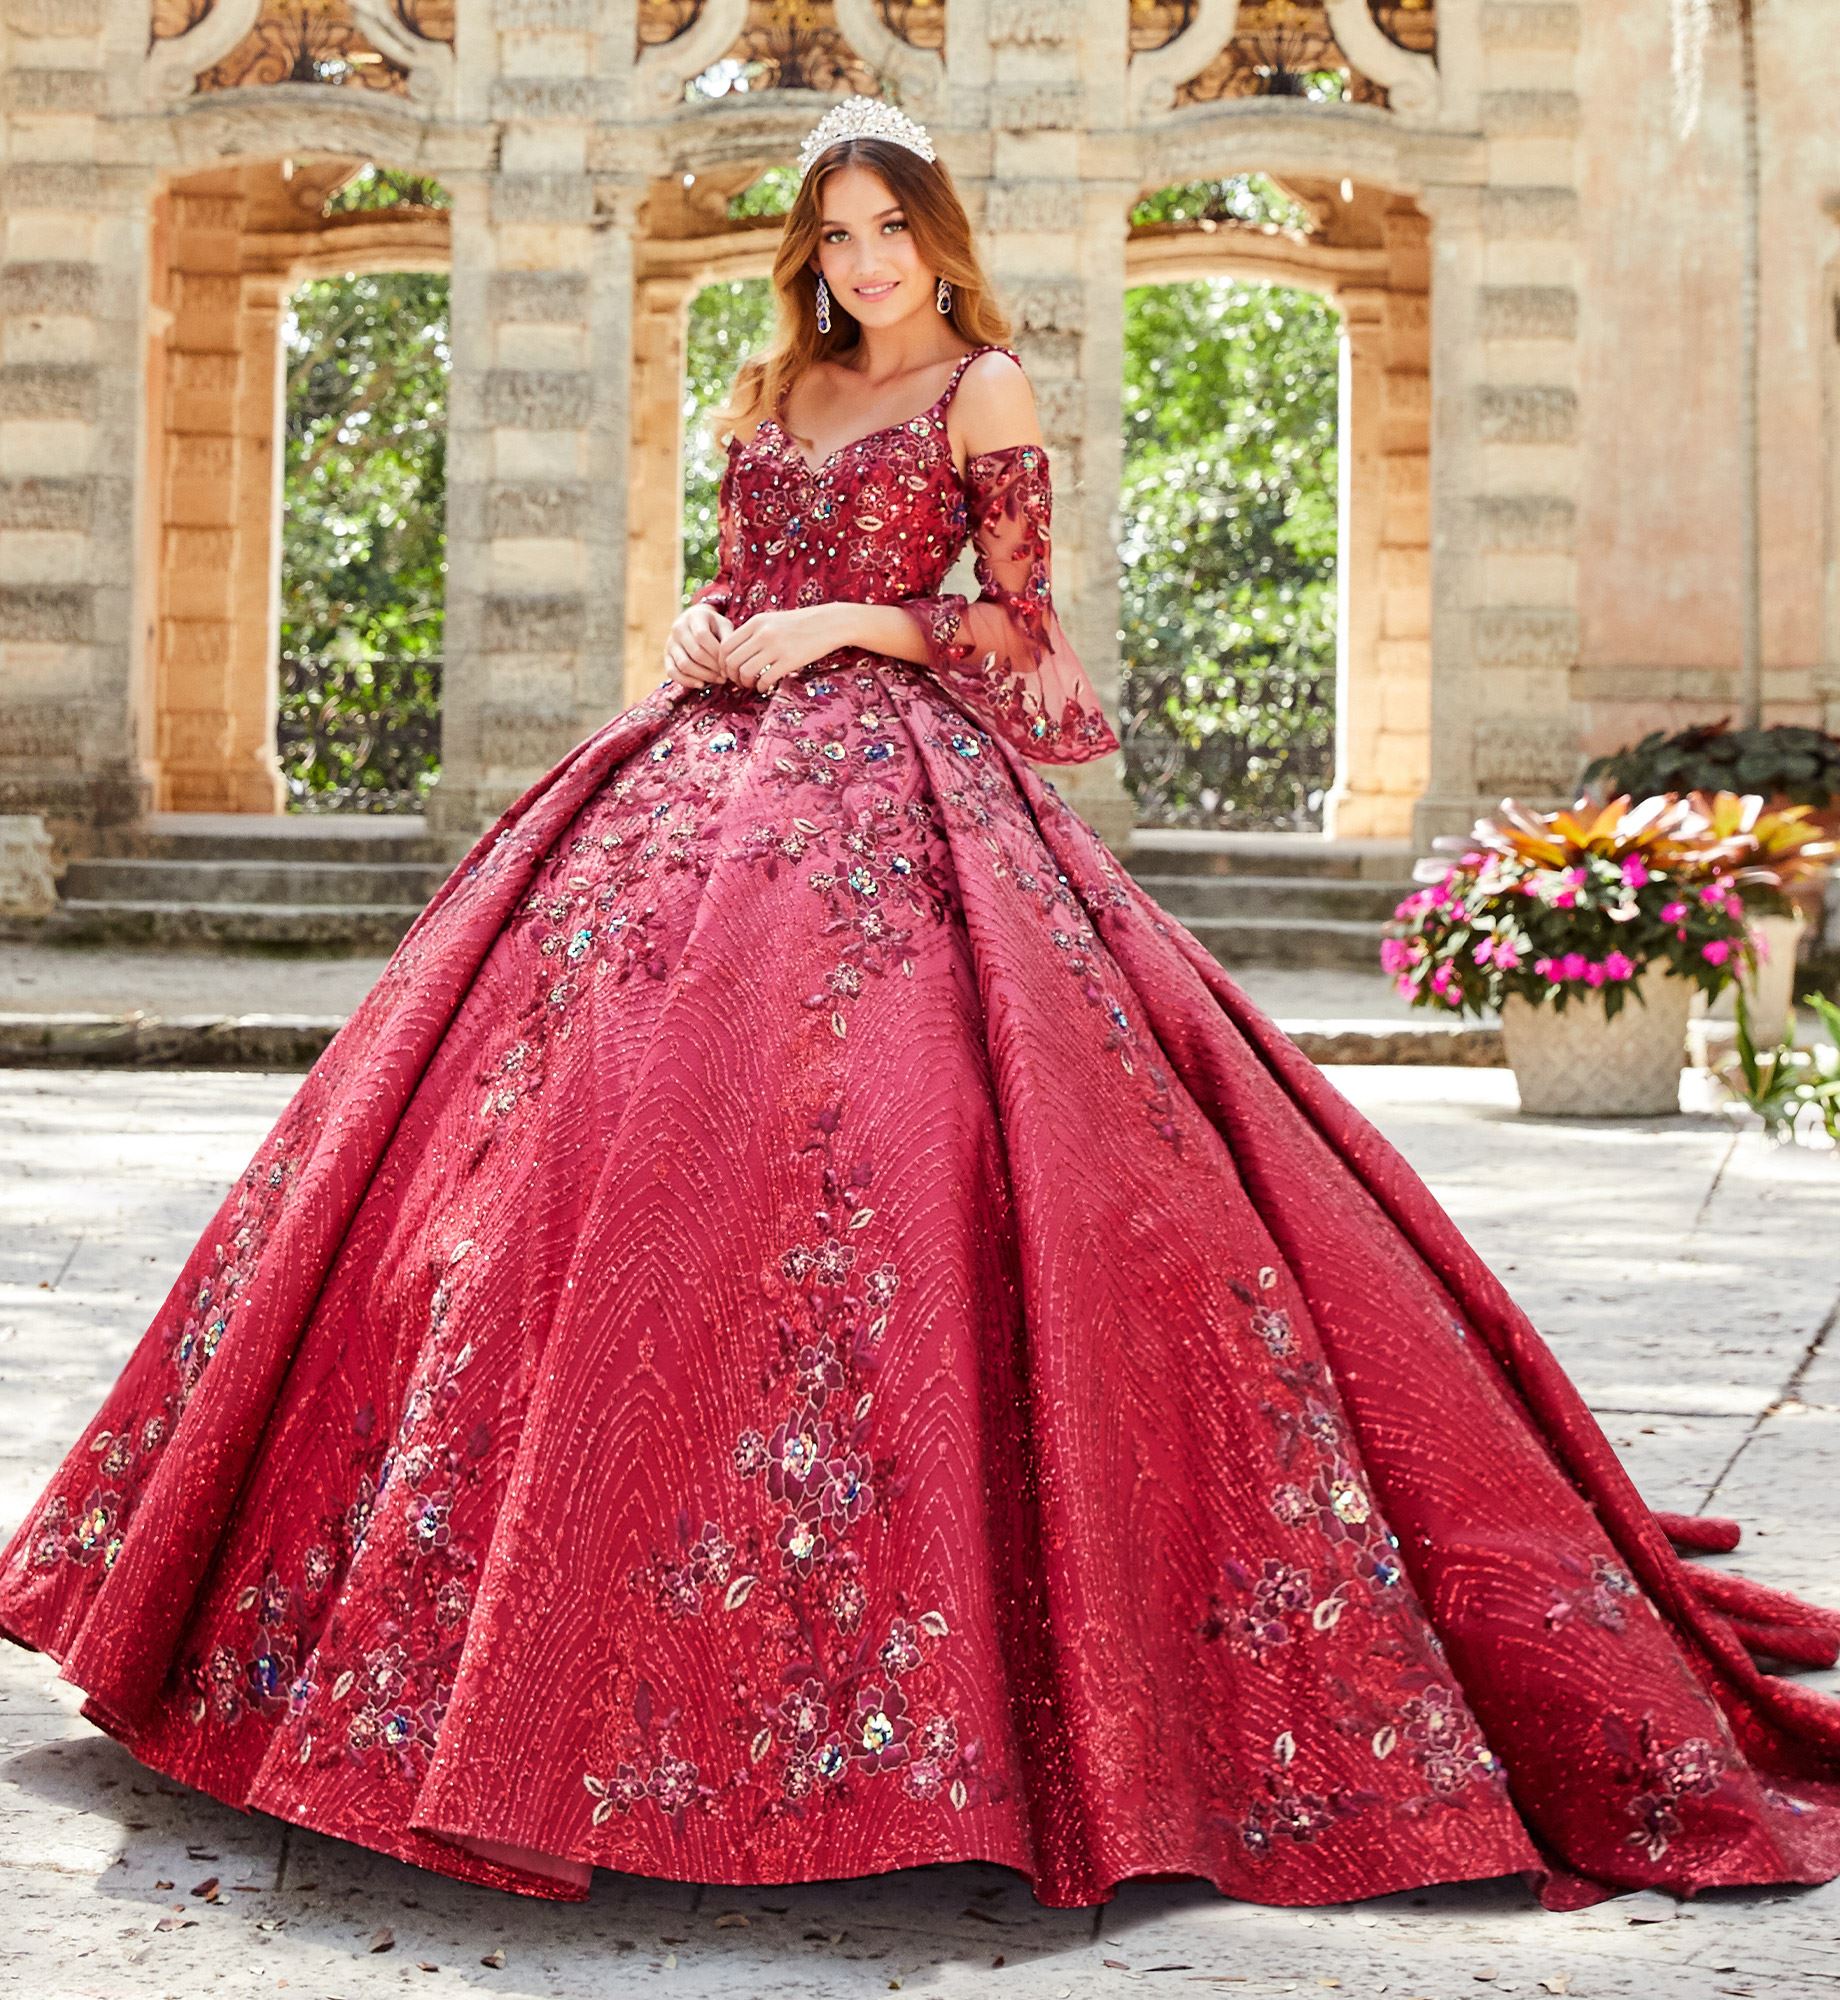 Brunette model in ruby red quinceañera dress with long sleeves